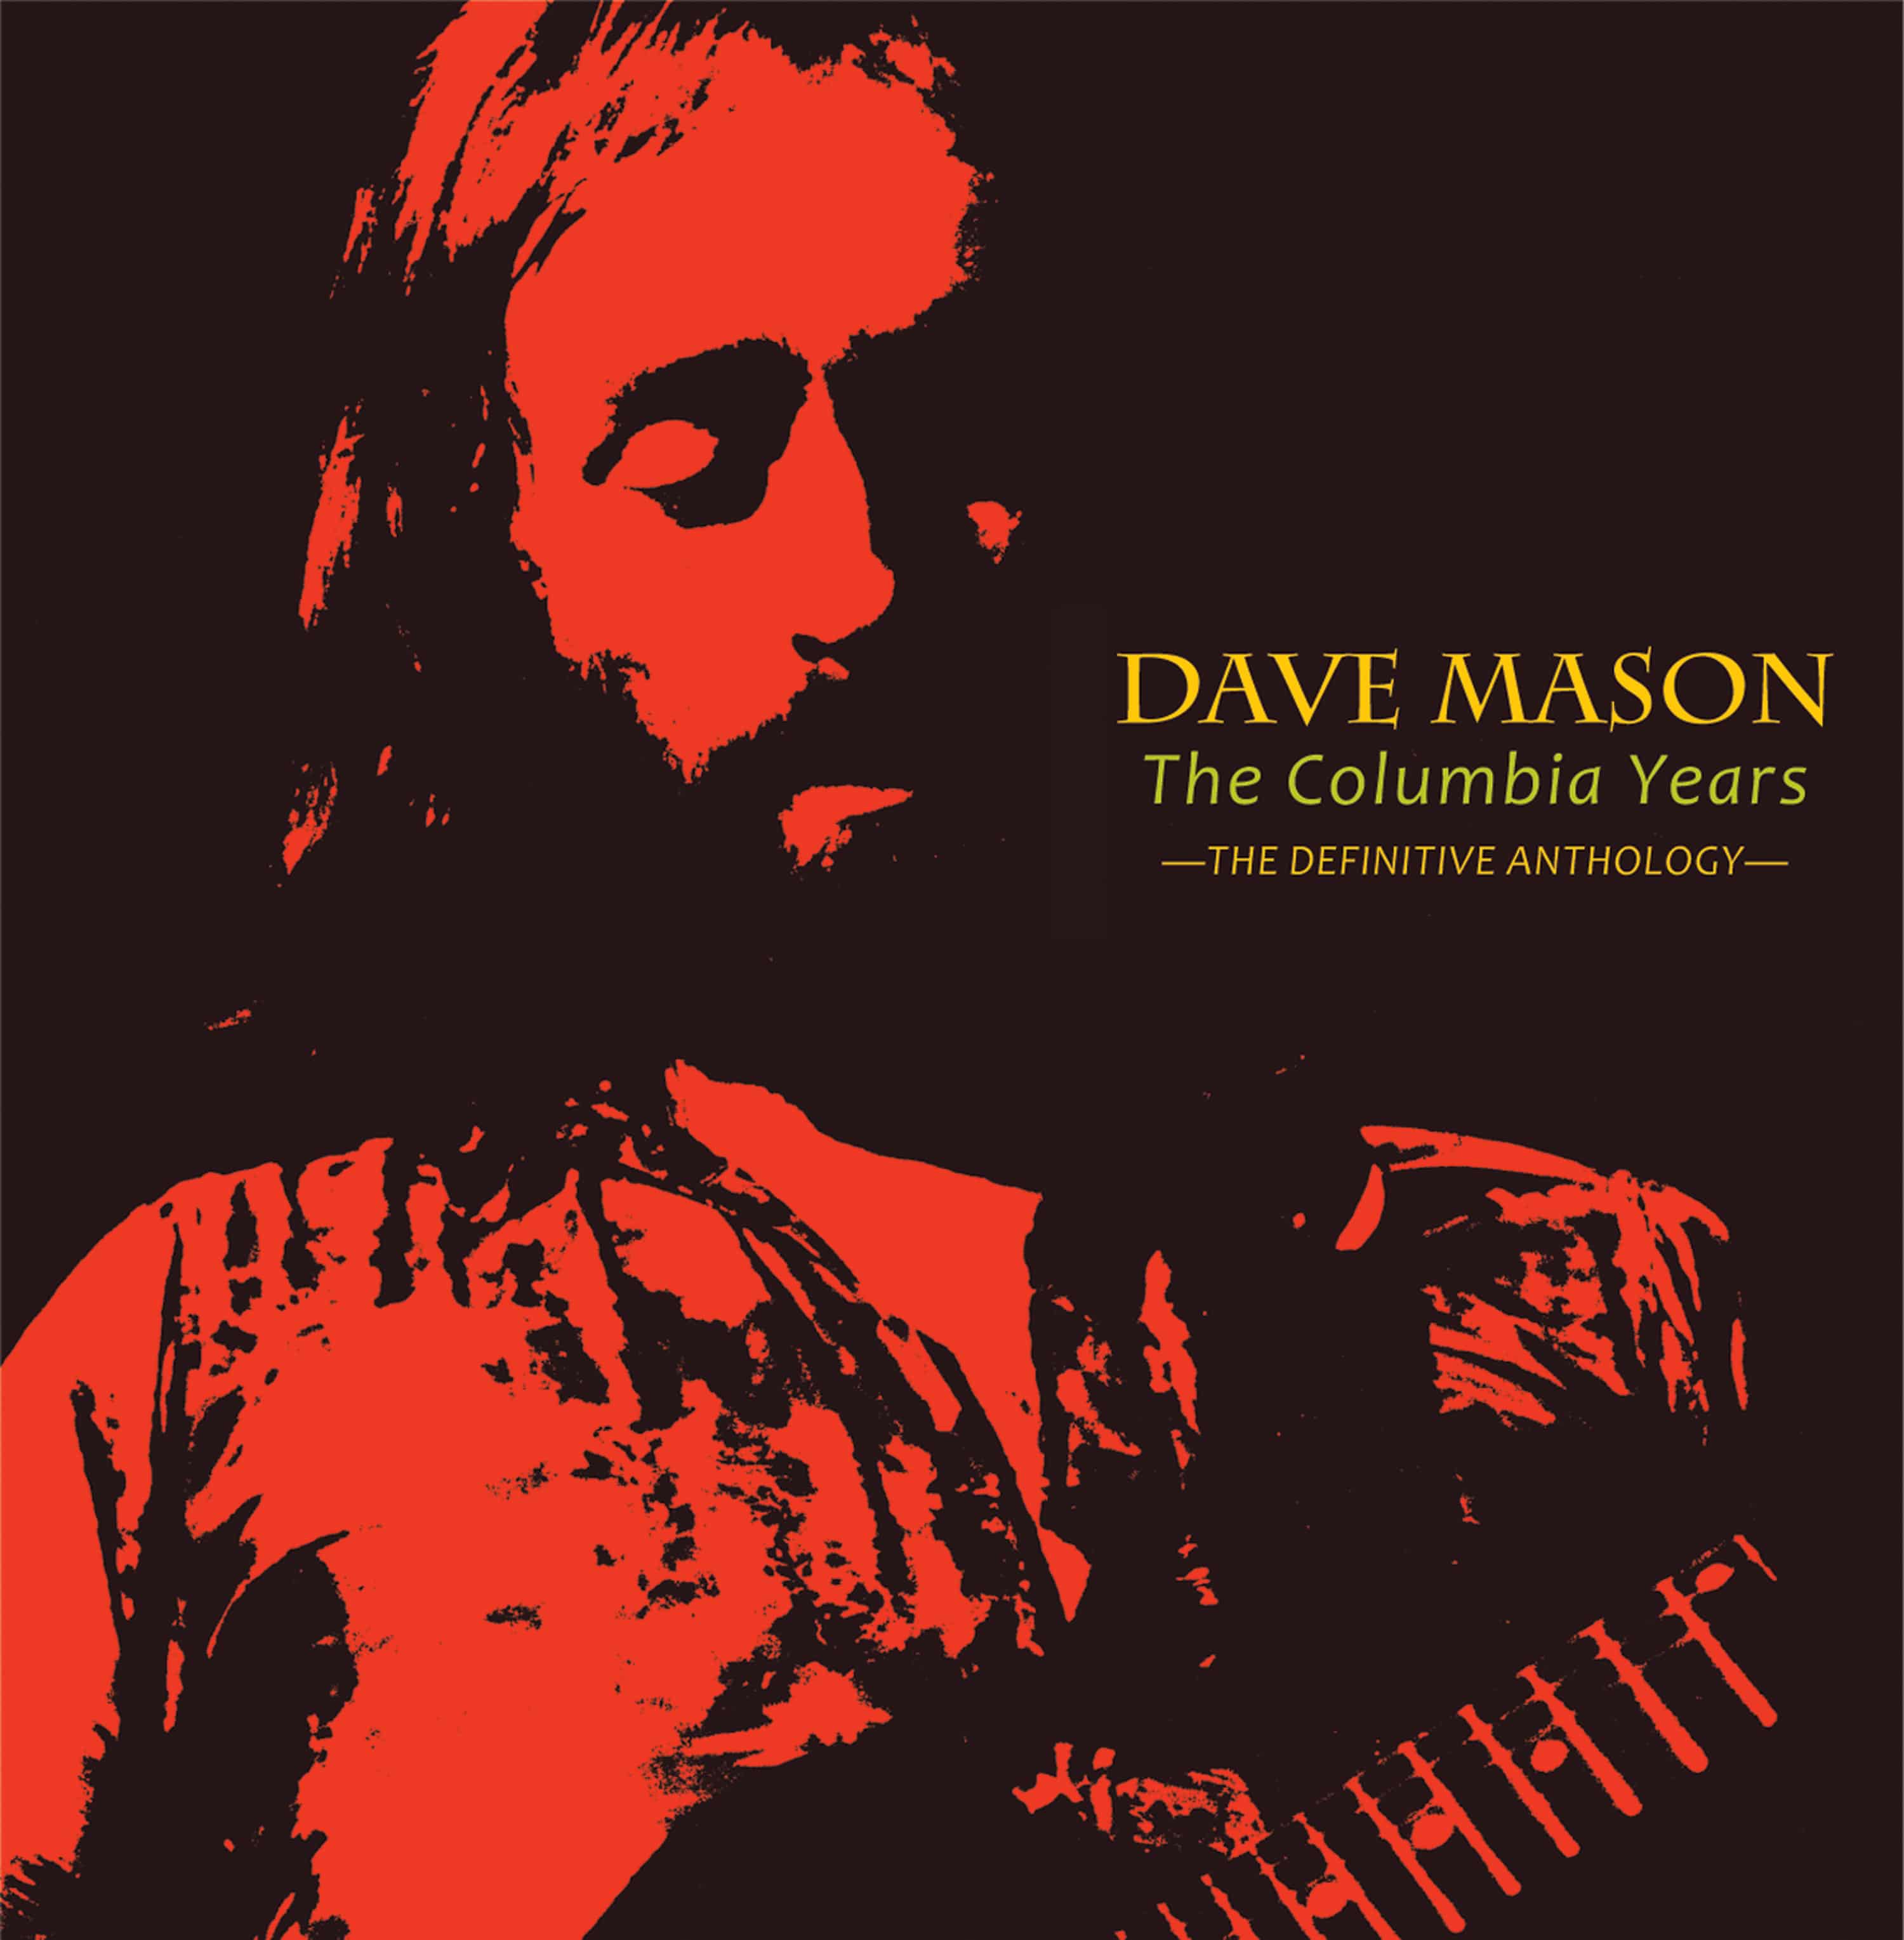 Dave Mason: The Columbia Years –The Definitive Anthology